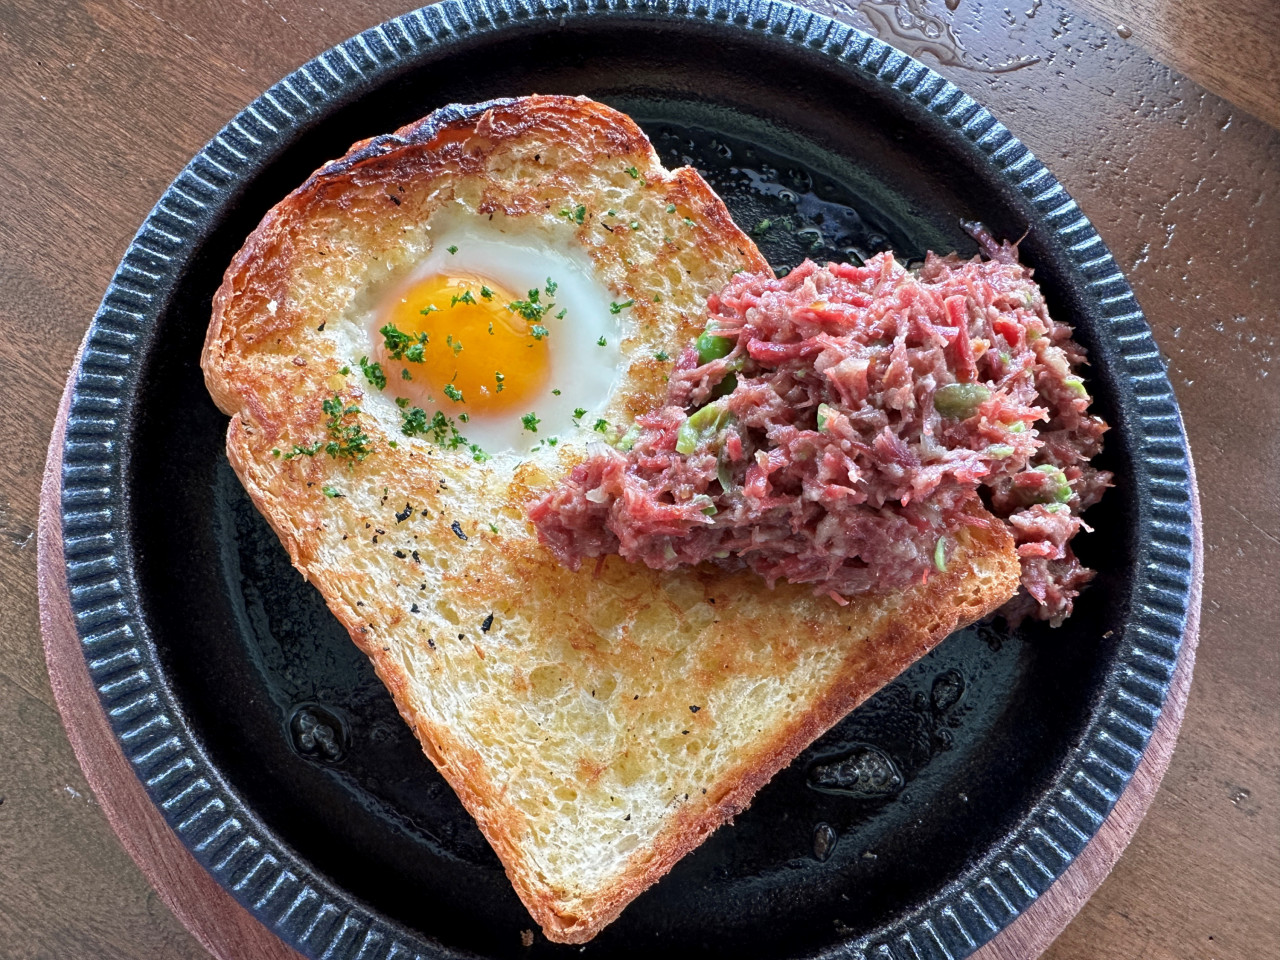 With the corned beef salted for an extended period of time and a well toasted and fluffy brioche toast, the Corned Beef Egg in a Hole is a hearty breakfast dish. – Haikal Fernandez pic